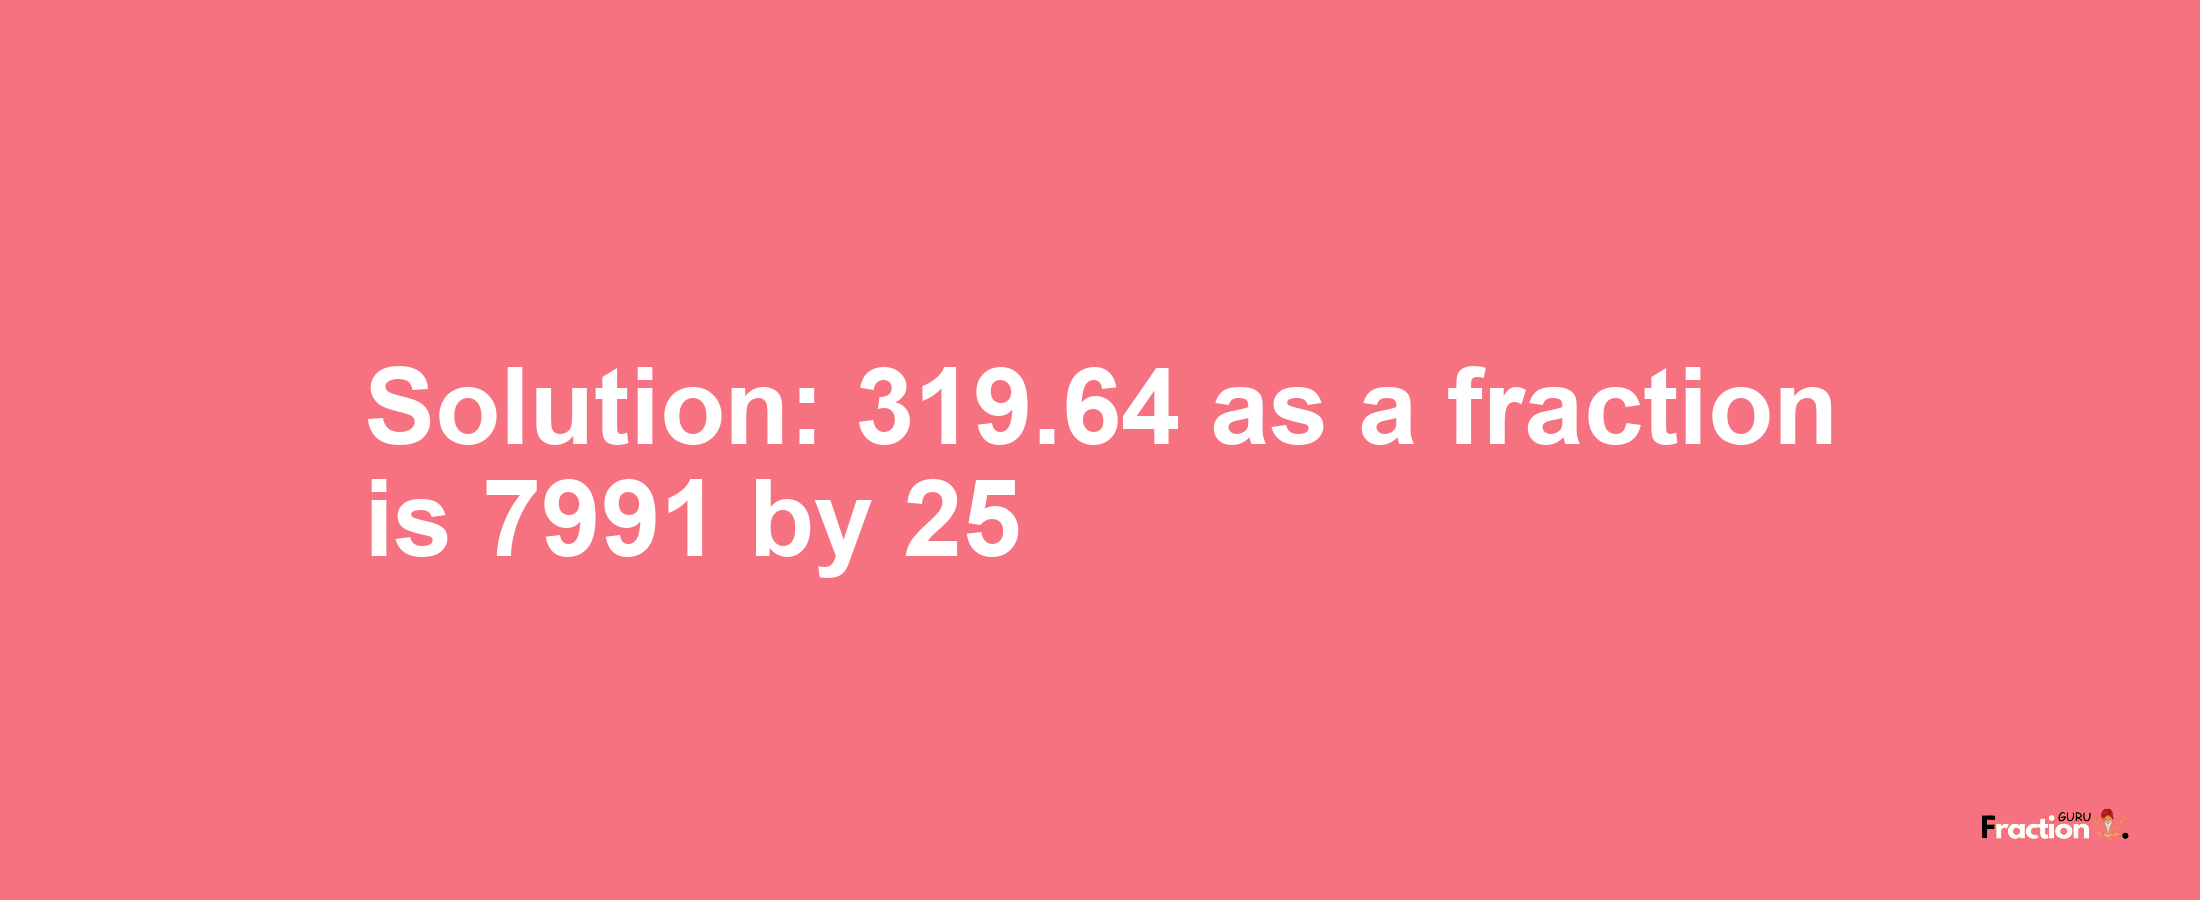 Solution:319.64 as a fraction is 7991/25